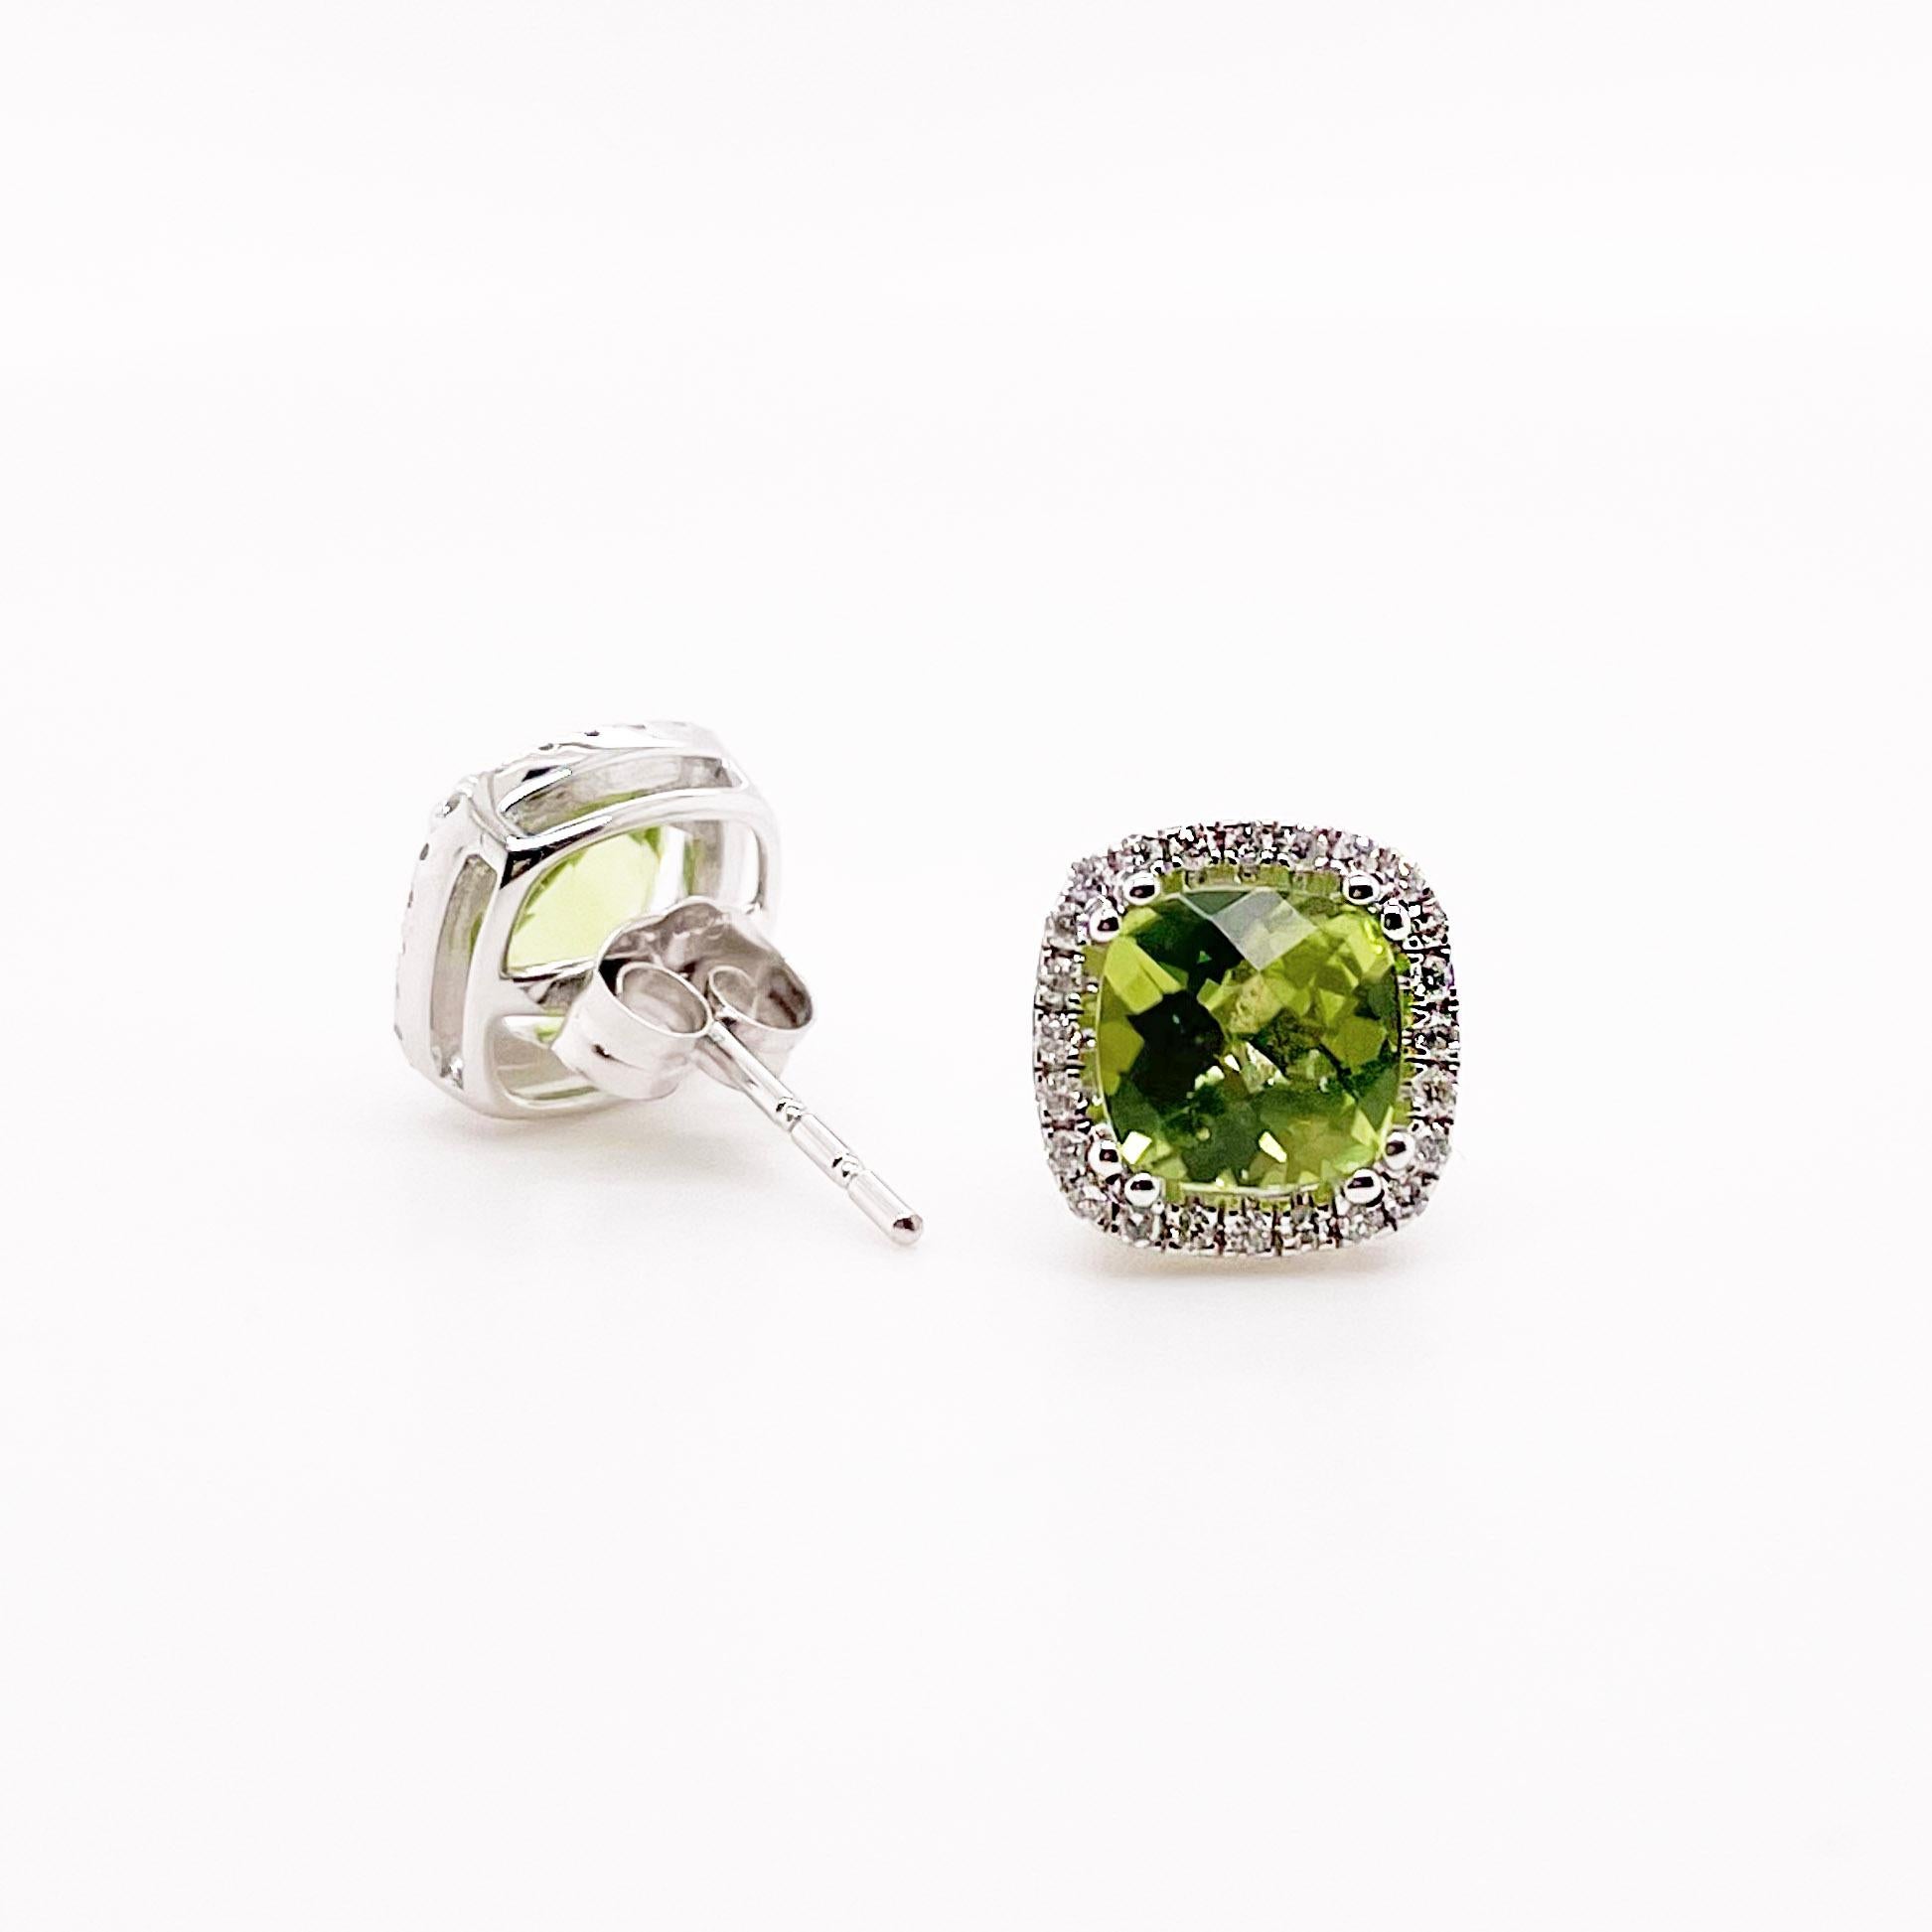 The perfect jewelry for any August celebration! These peridot and diamond halo earrings are made with genuine, natural peridot gemstones and diamonds. The earrings are solid 14k gold but lightweight and comfortable to wear! Do you have a birthday or